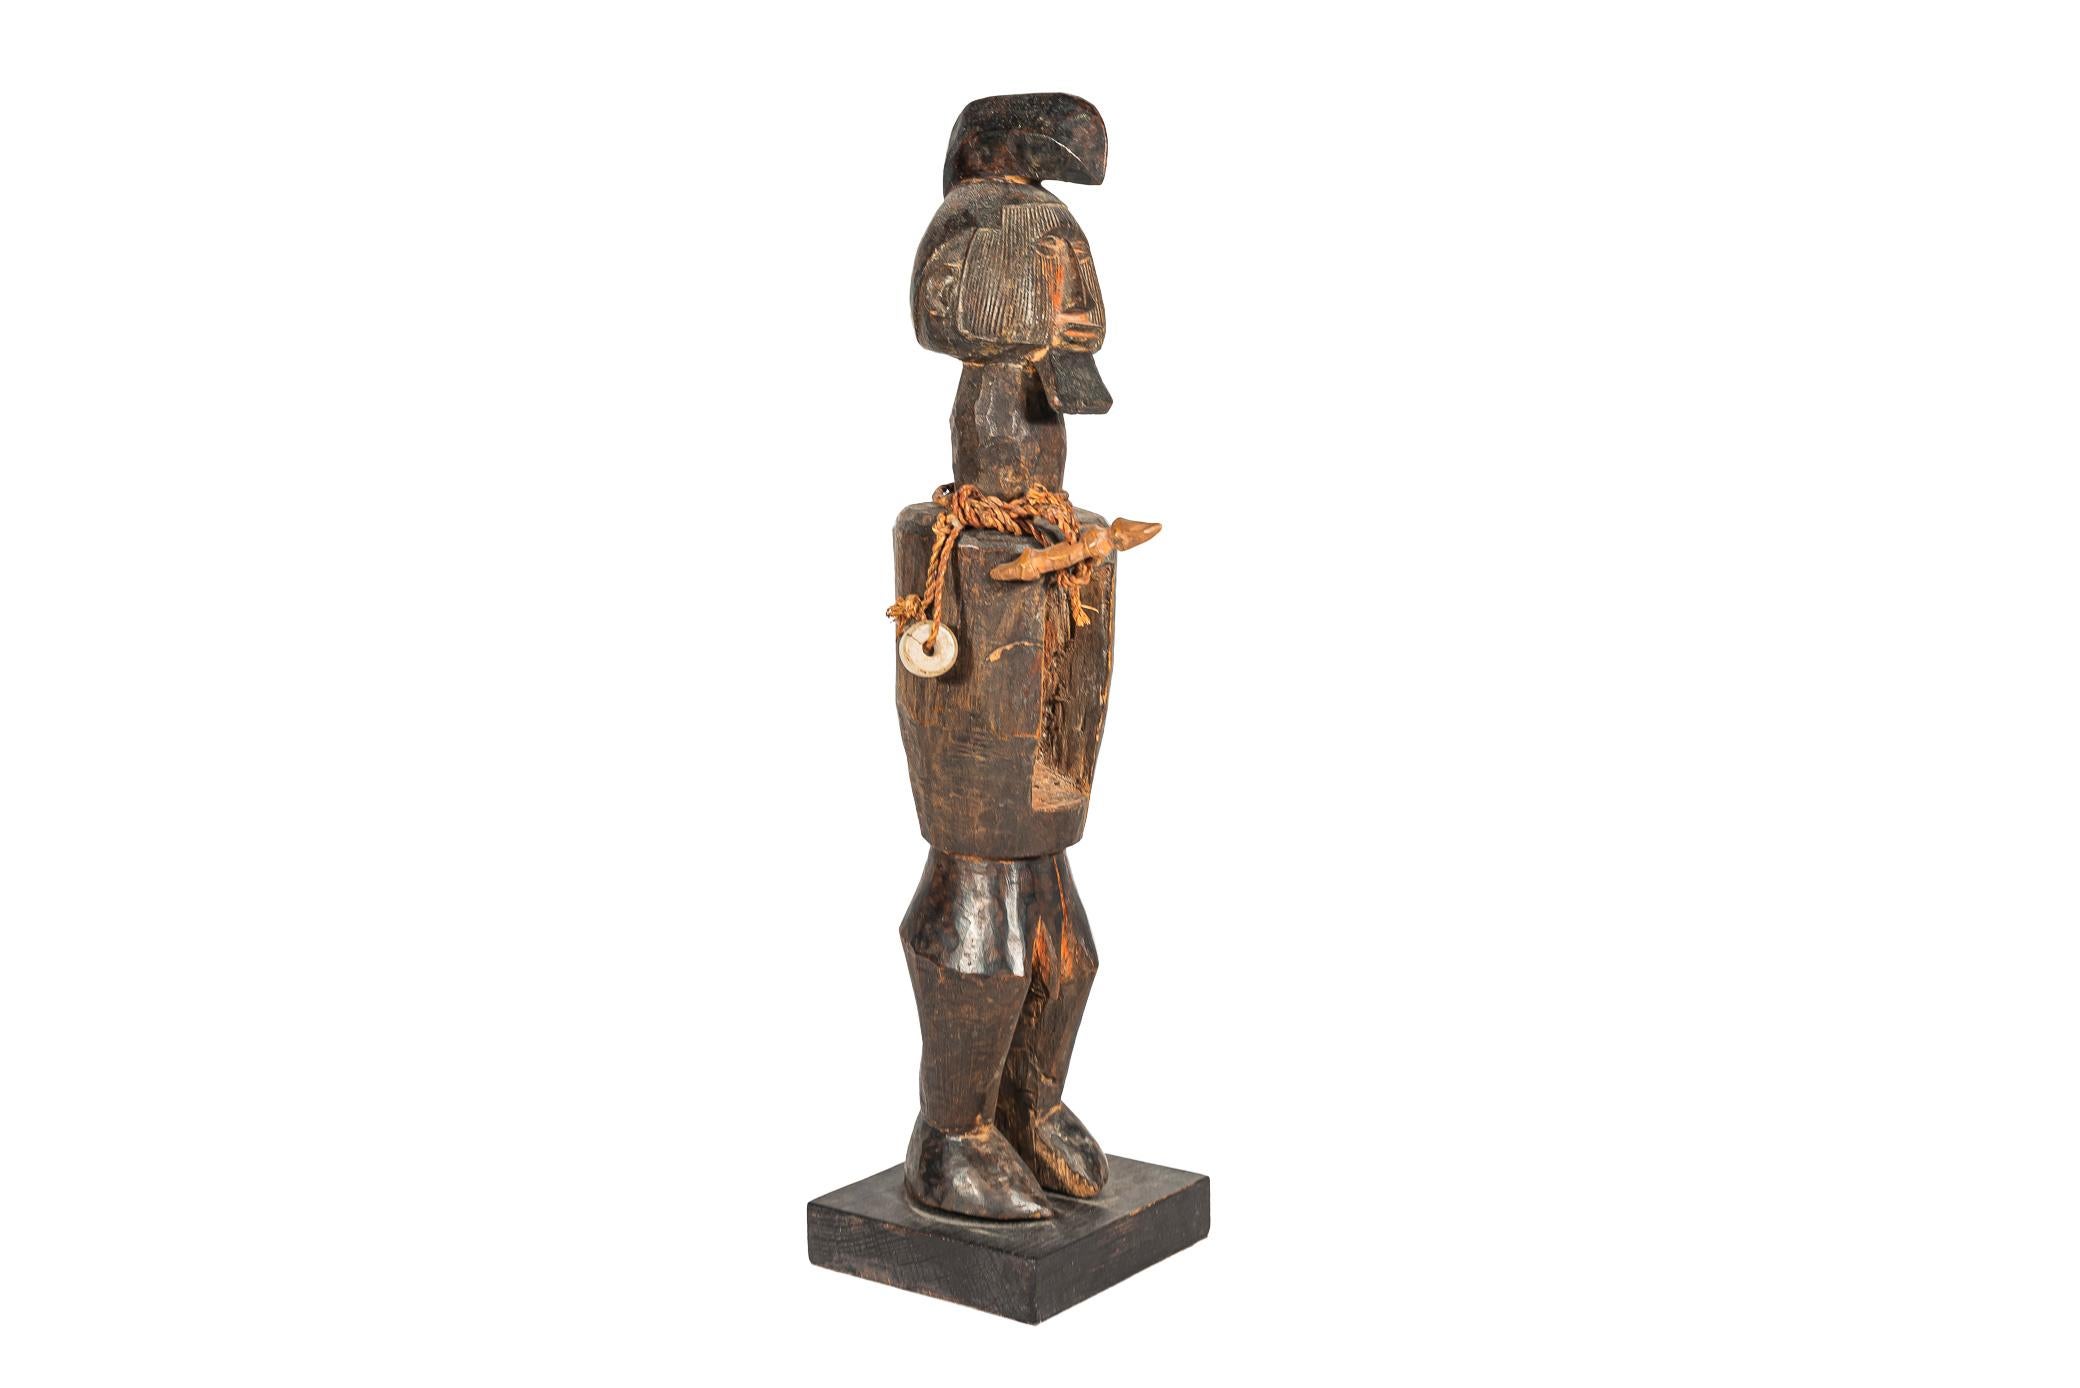 Butti Téké statue, 
Wood and rope,
Absent load,
Democratic Republic of the Congo, circa 1940.

Measures: Height 33 cm, depth 8 cm, width 8 cm.

Provenance: Collection Andrault.

Established between the Democratic Republic of Congo, the Republic of